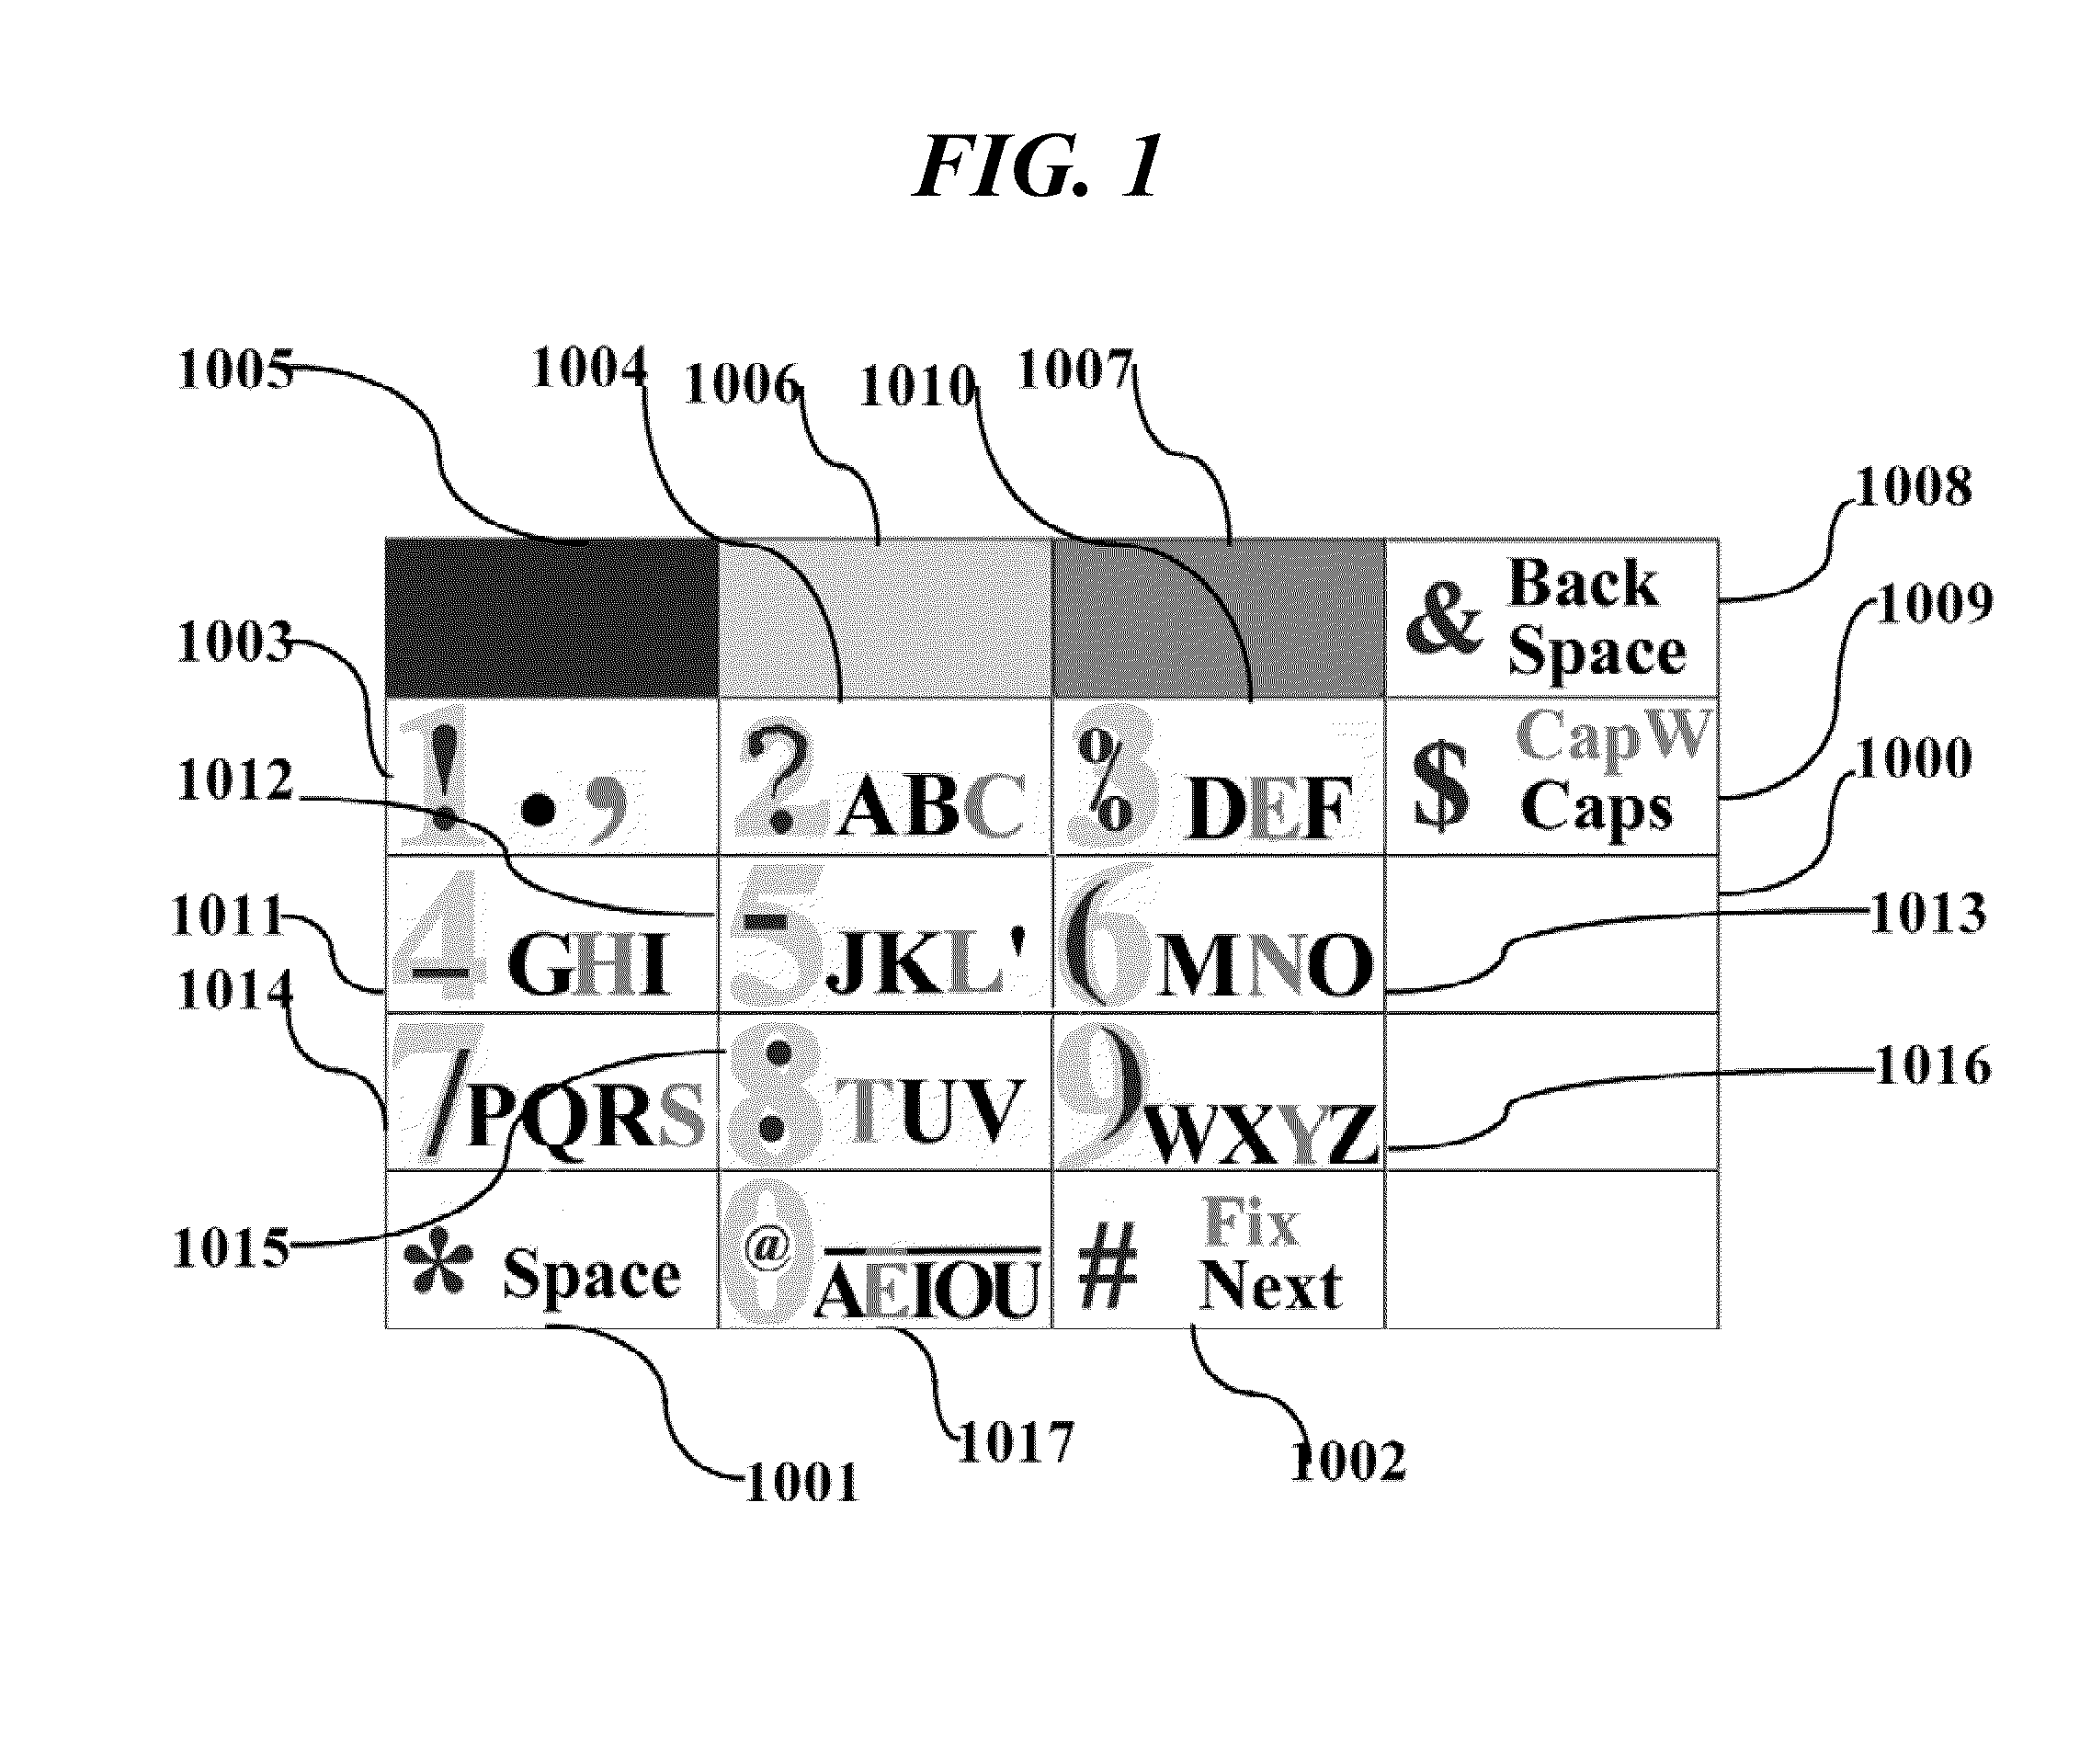 Method and apparatus for discoverable input of symbols on a reduced keypad